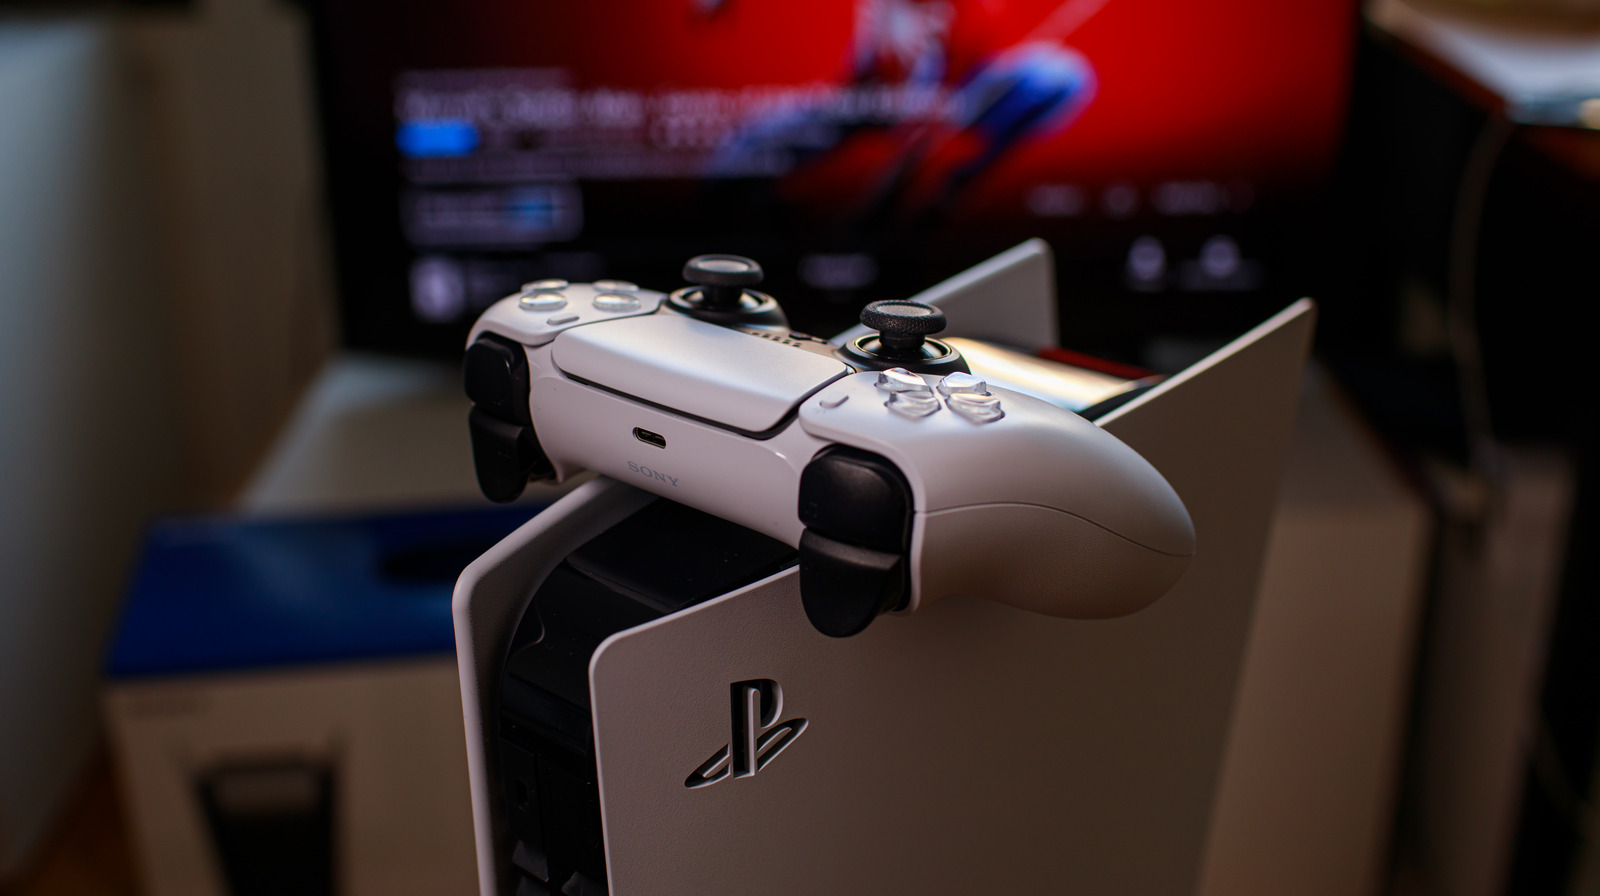 Report: PS5 Pro Allegedly Releasing Late 2024. New Details